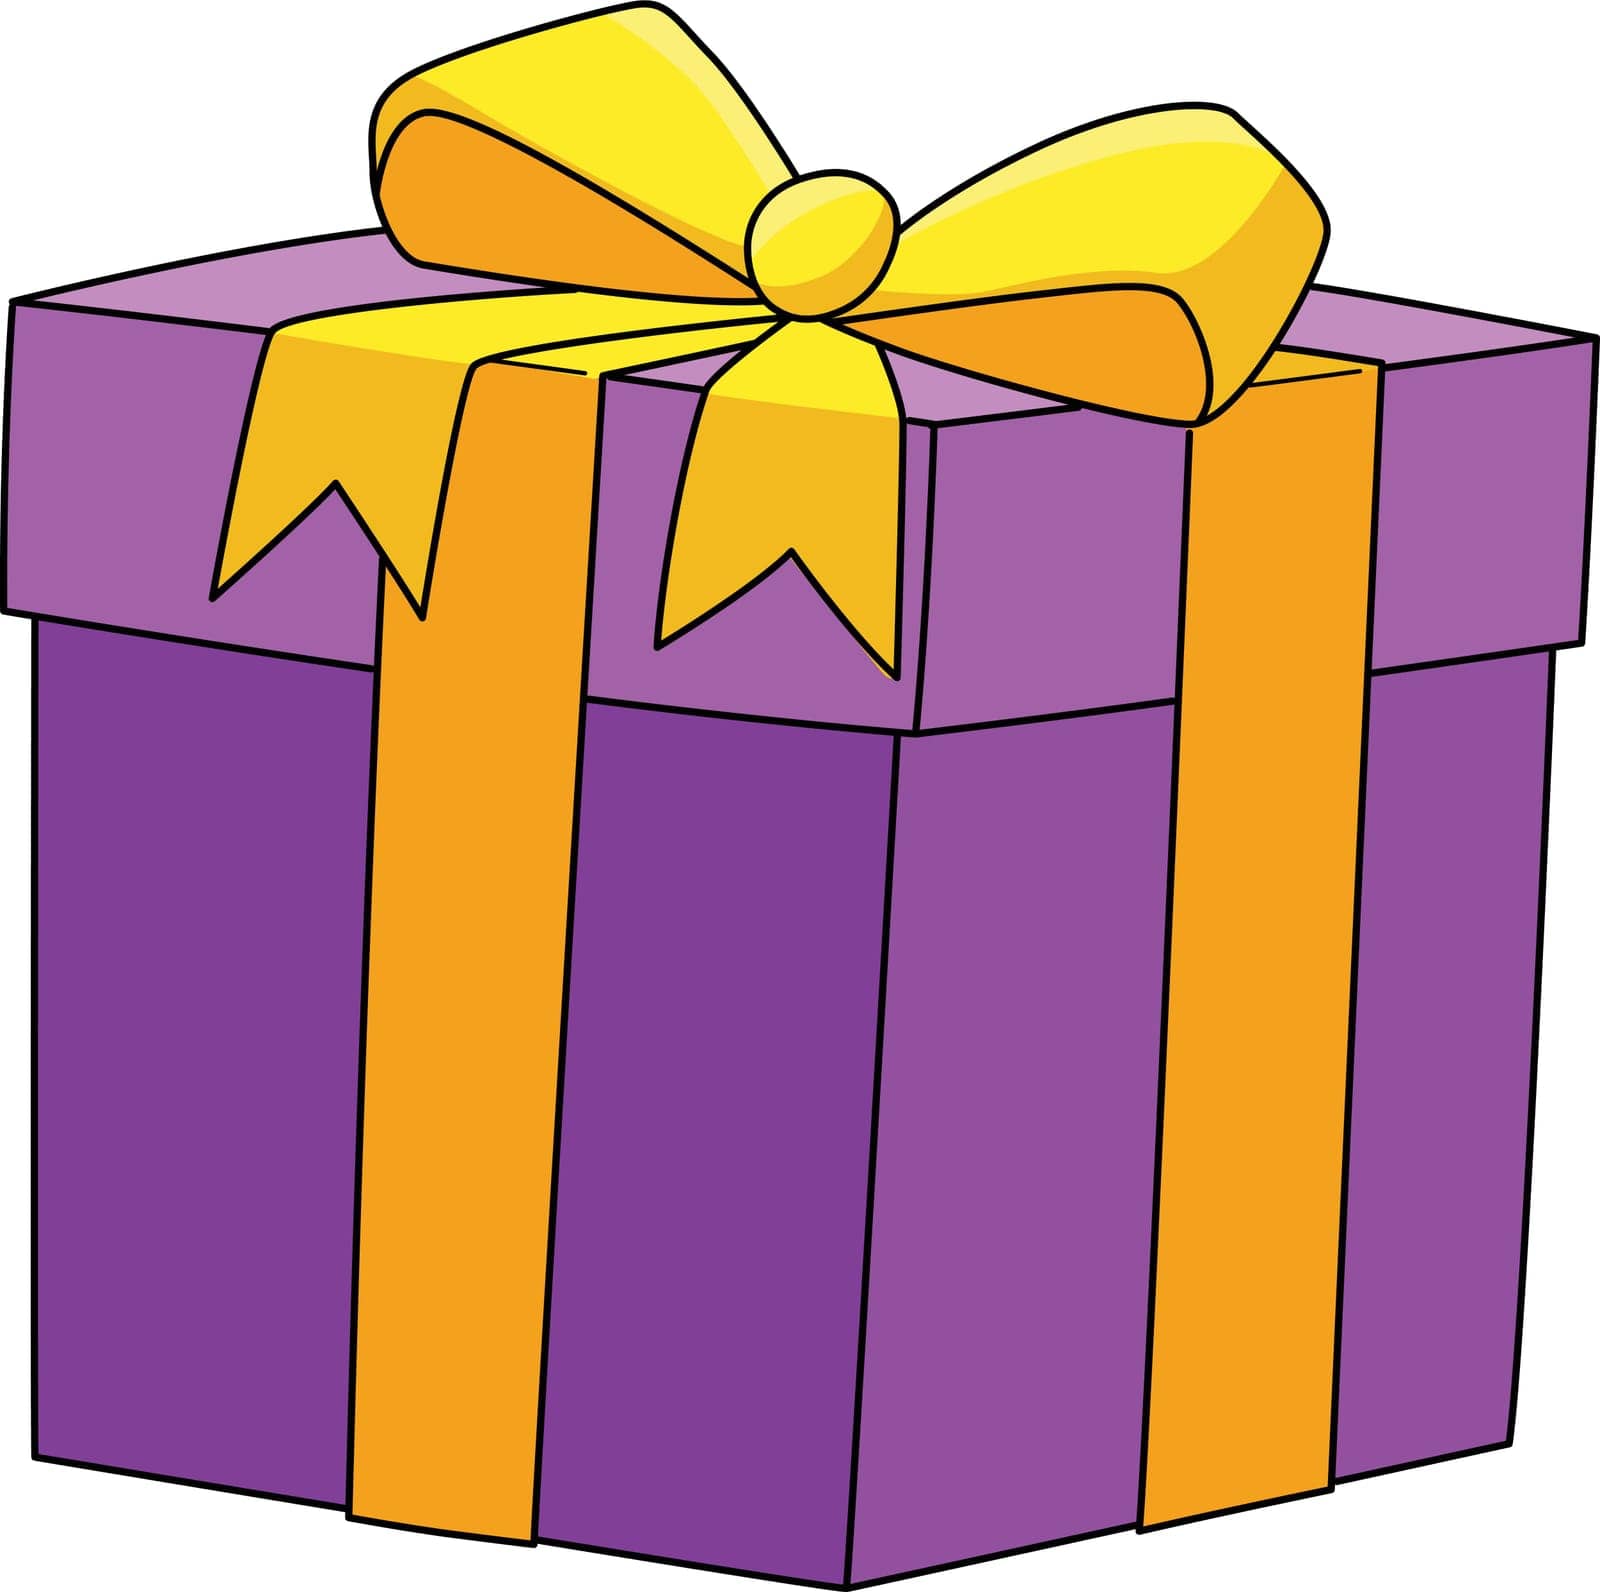 This cartoon clipart shows a Birthday Present illustration.